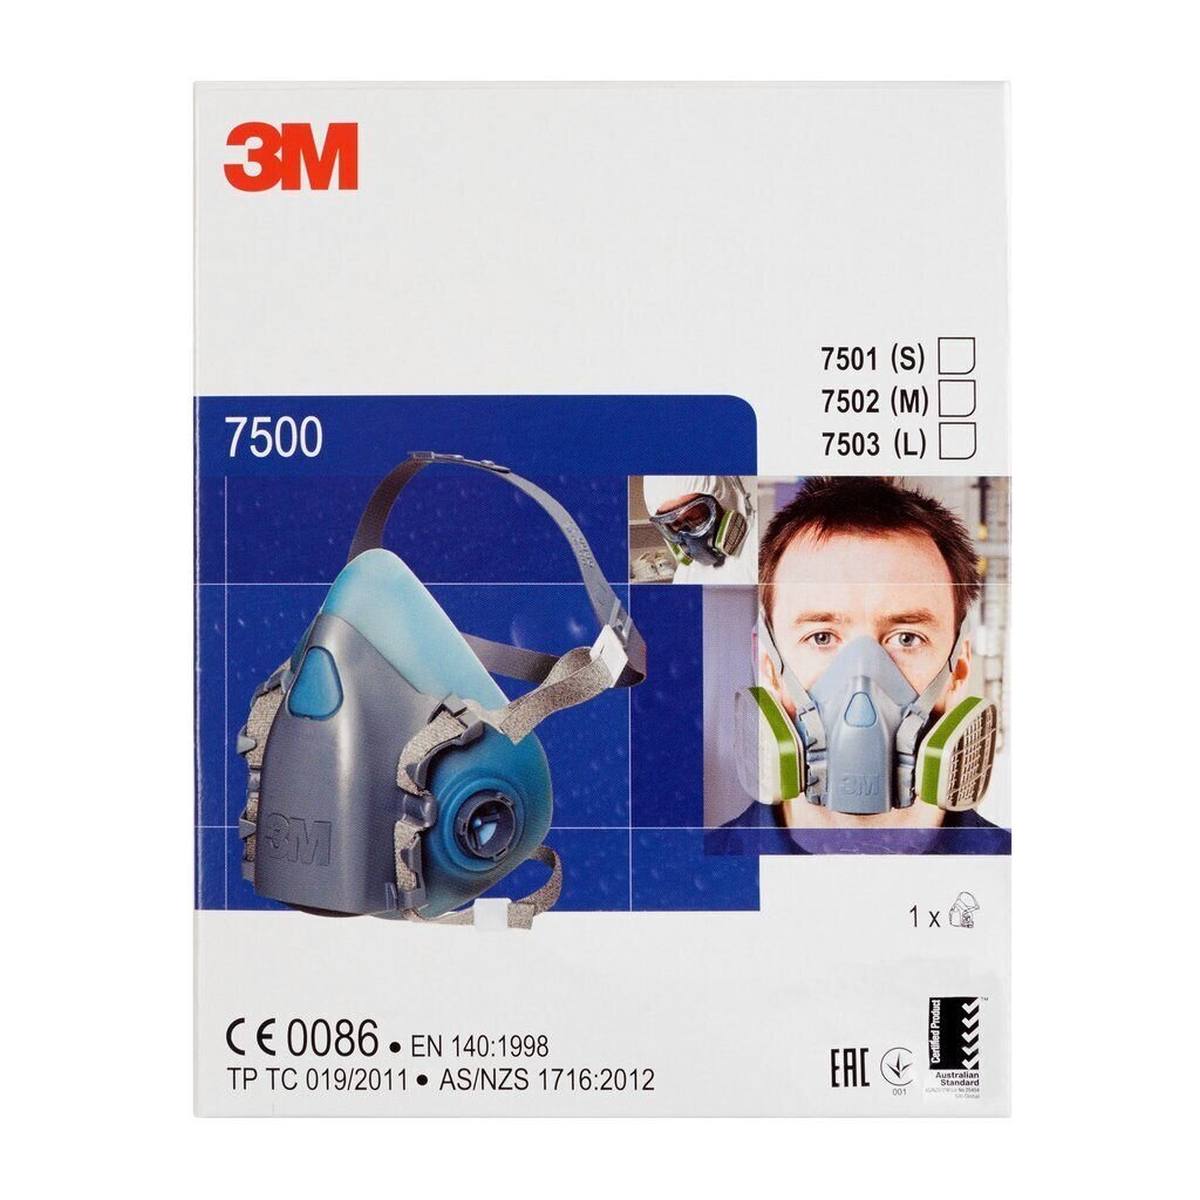 3M 7502M Half mask body silicone / thermoplastic polyester size M